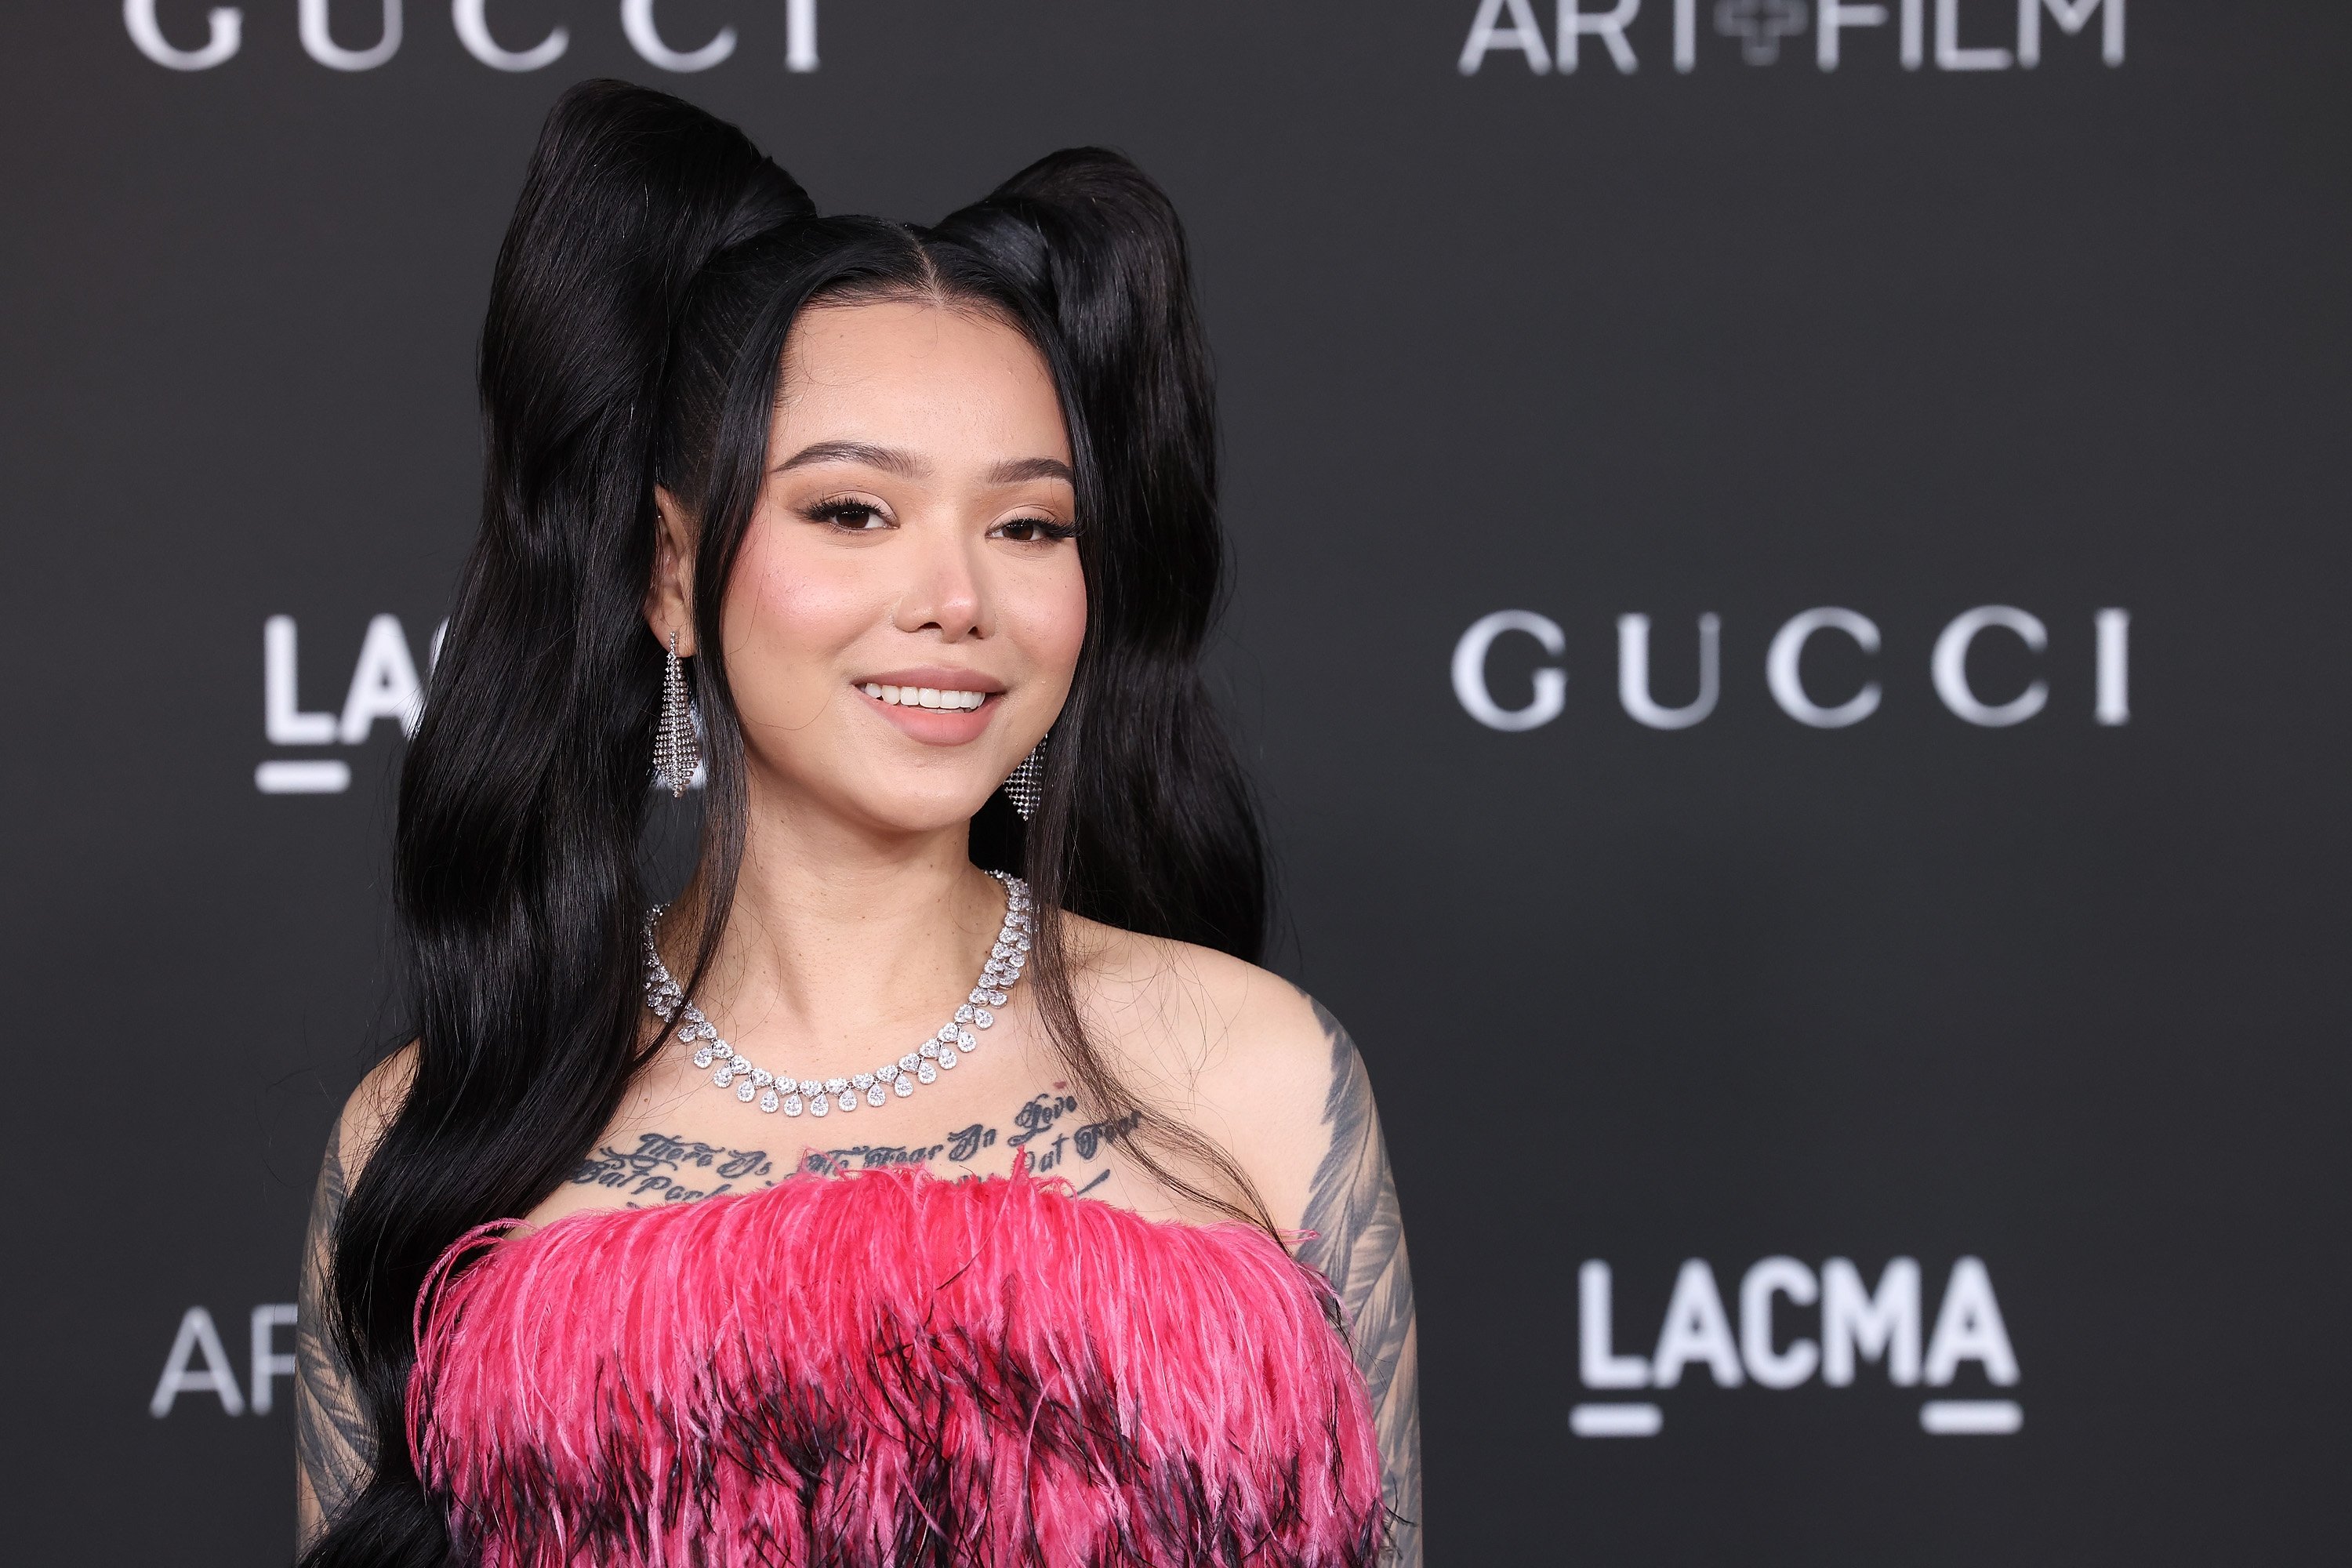 Bella Poarch attends the 2021 LACMA Art + Film Gala presented by Gucci at Los Angeles County Museum of Art